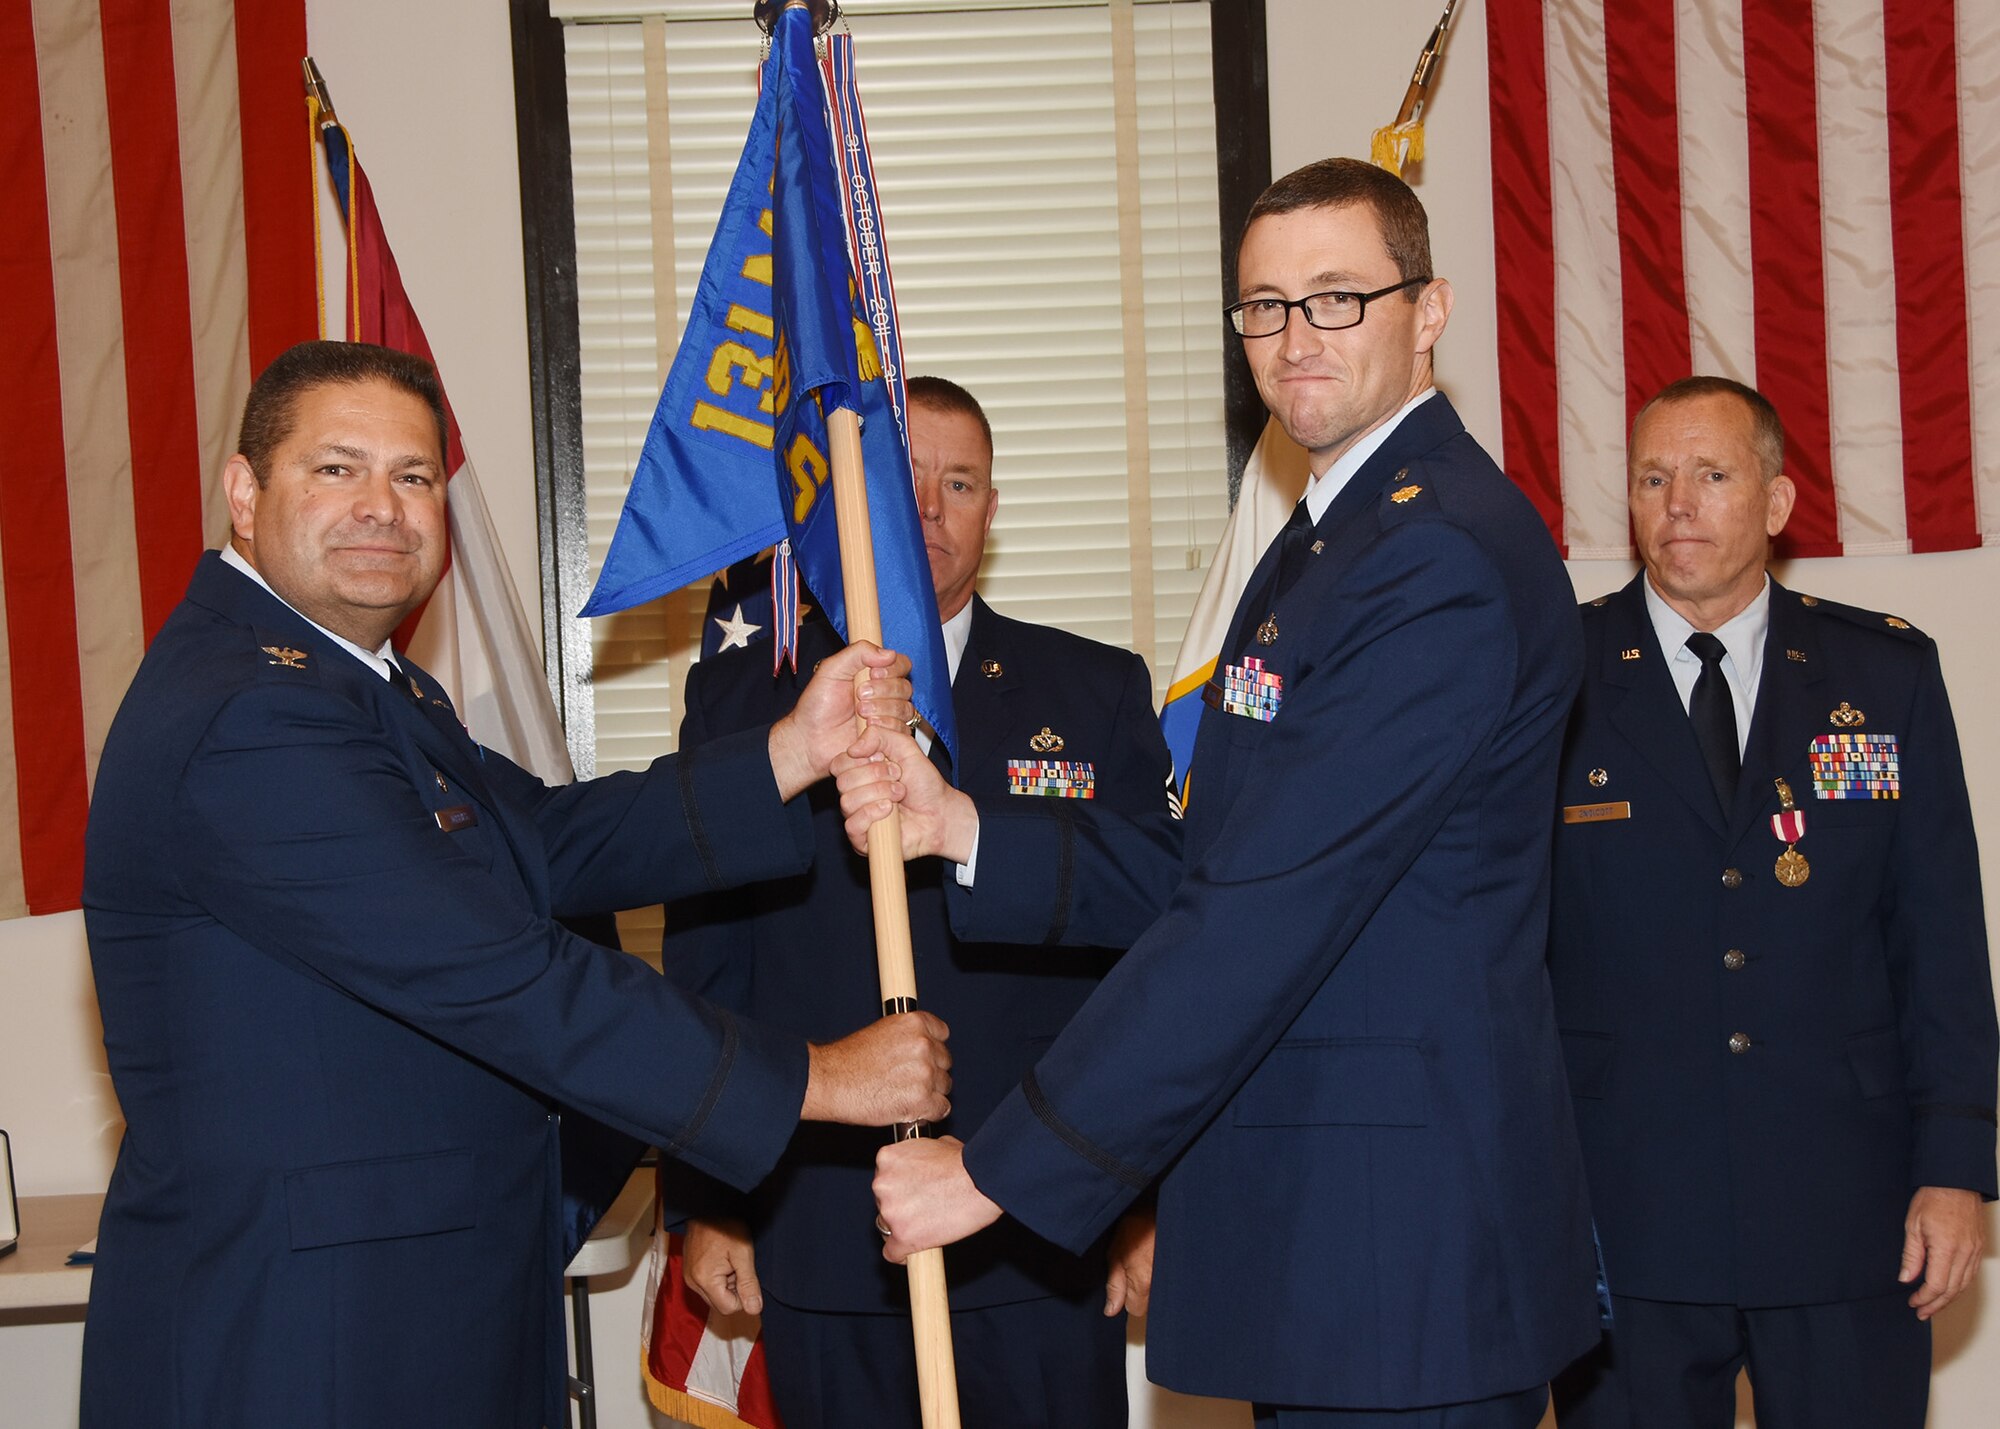 While outgoing commander Lt. Col. Lane Endicott stands by, Maj. Daniel Nelsen accepts the 131st Civil Engineers Squadron guidon from 131st Bomb Wing Mission Support Group commander Col. Mike Jurries. The change of command ceremony was held at Jefferson Barracks Air National Guard Base, Missouri, Oct 1, 2016. (U.S. Air National Guard photo by Senior Master Sgt. Mary-Dale Amison)